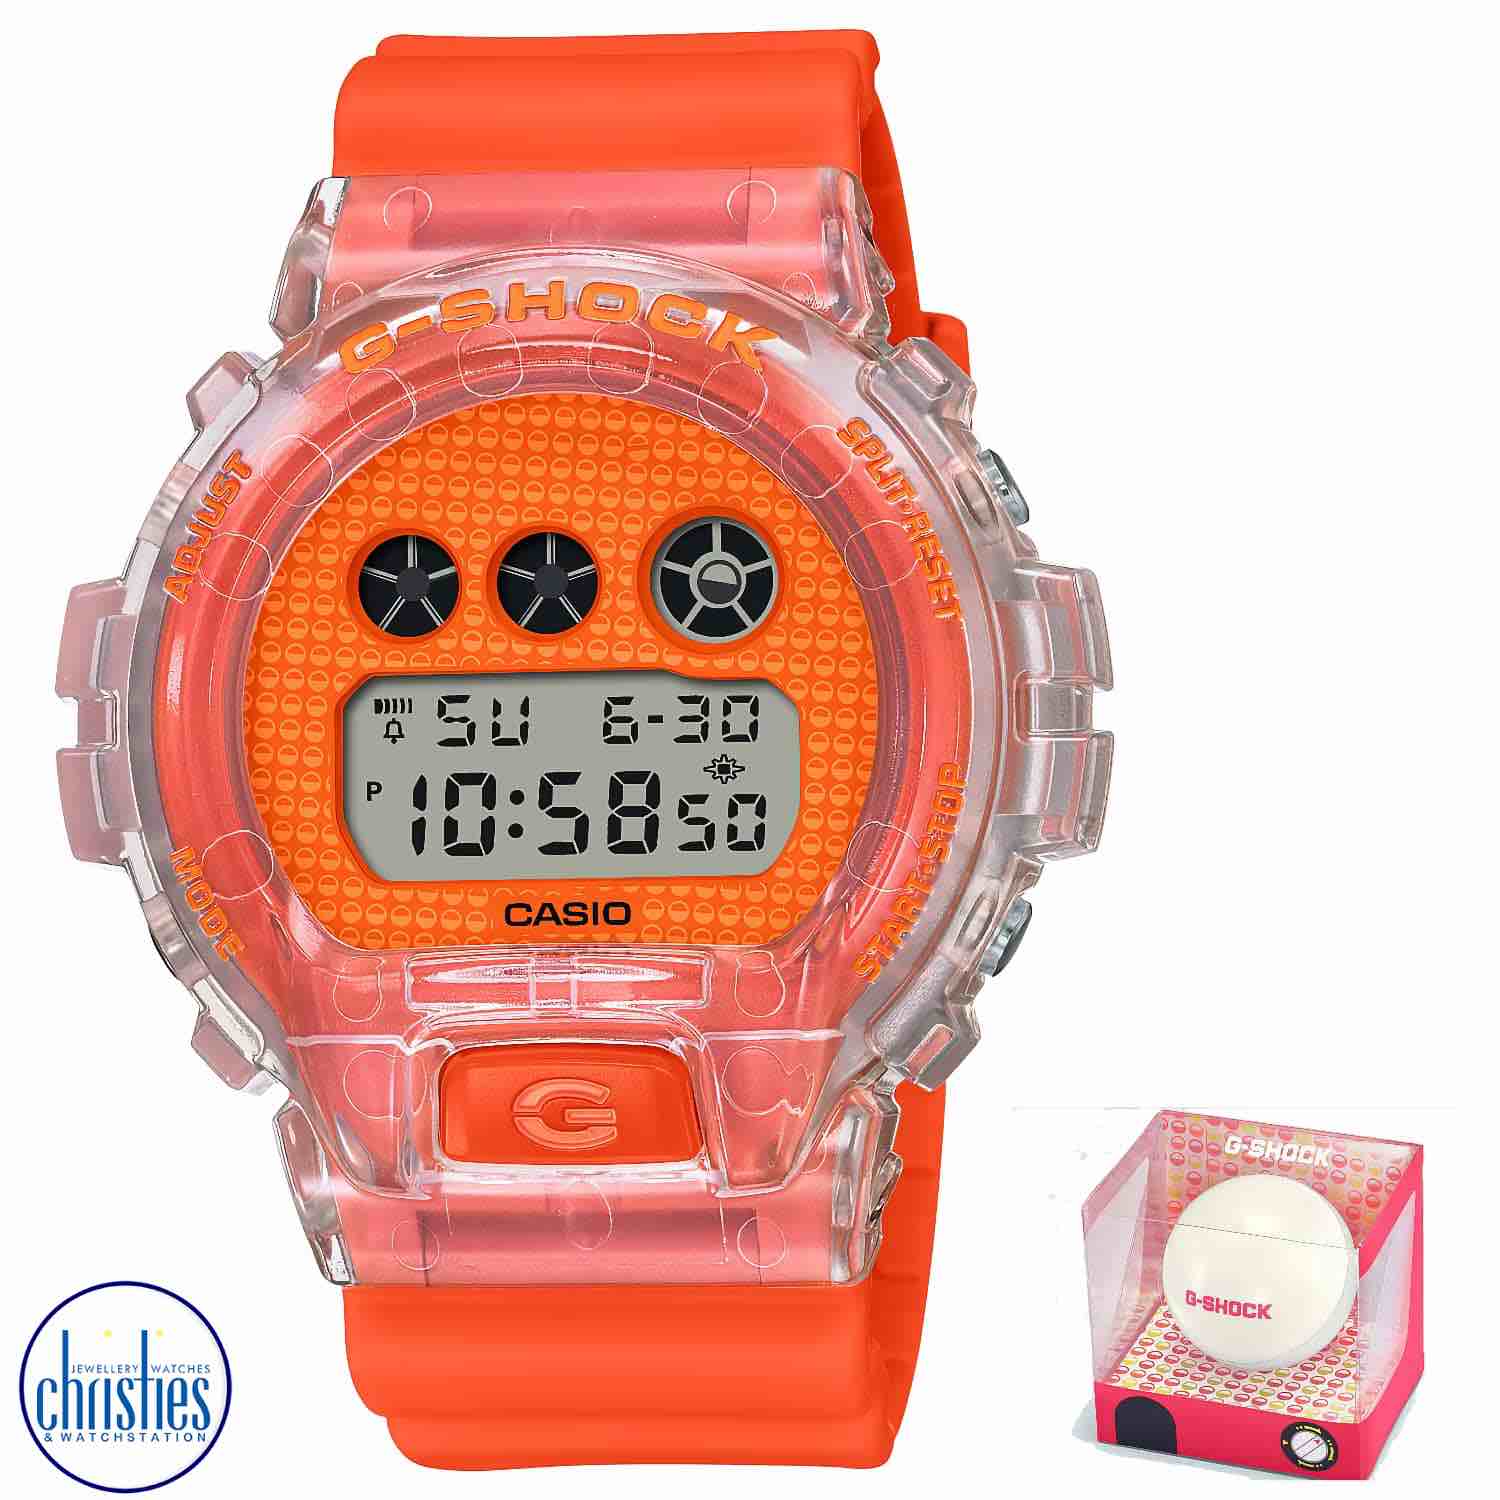 DW6900GL-4D Casio G-Shock Lucky Drop Watch. Introducing the latest addition to the G-SHOCK family - the DW6900GL-4D Lucky Drop watch!